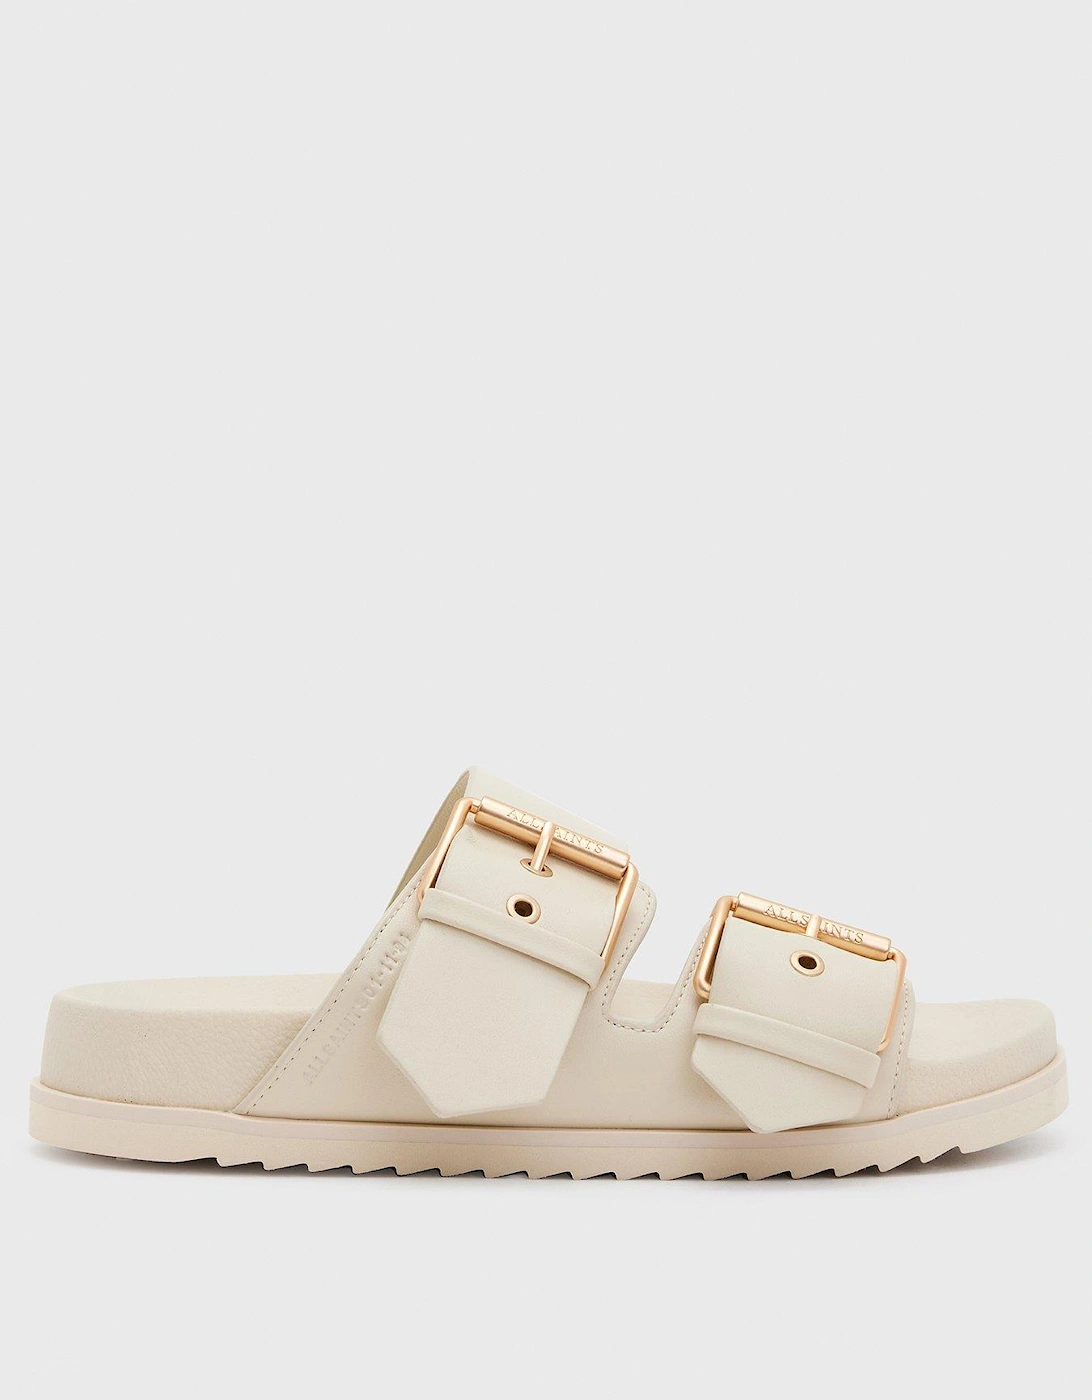 Sian Sandals - White, 2 of 1